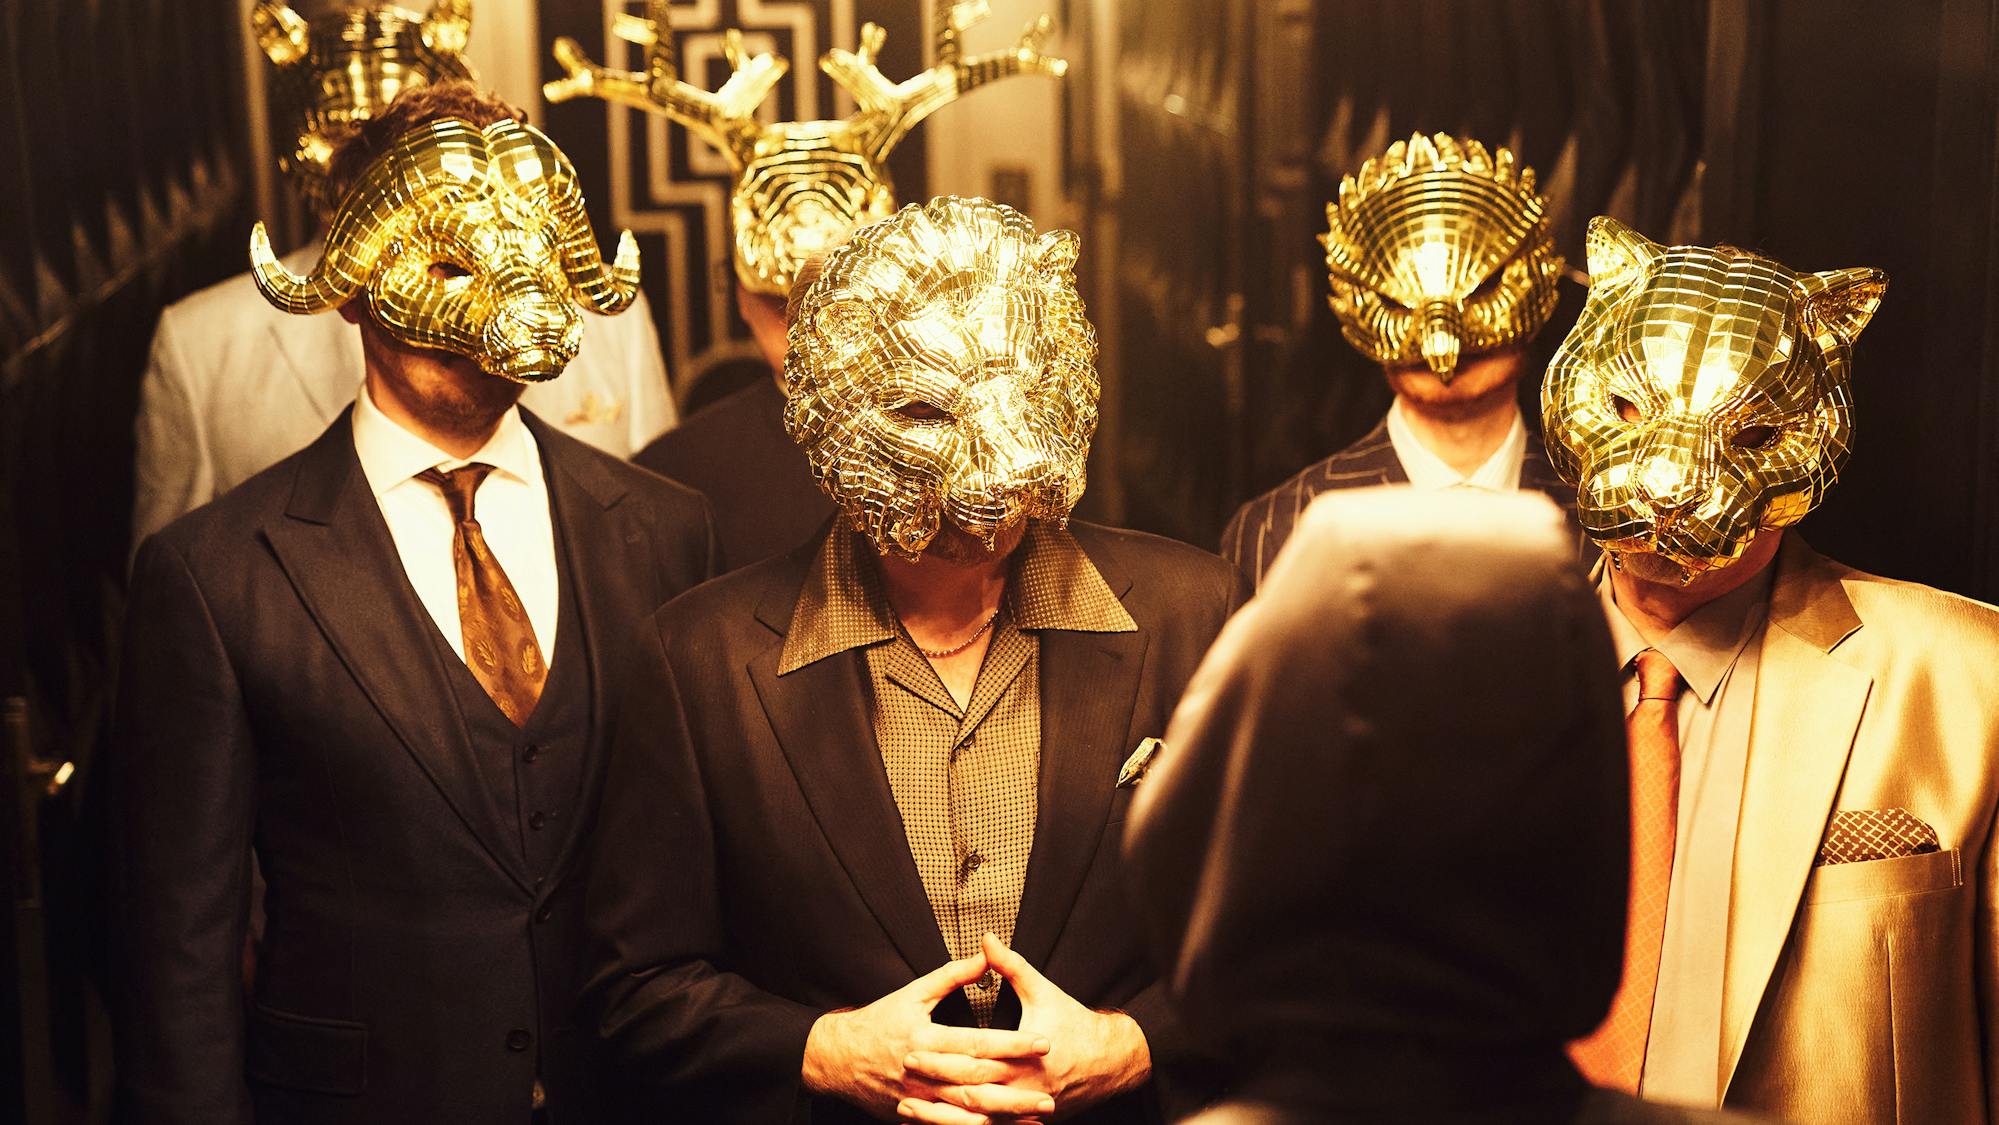 A group of V.I.P.s wear creepy gold animal masks and suits.